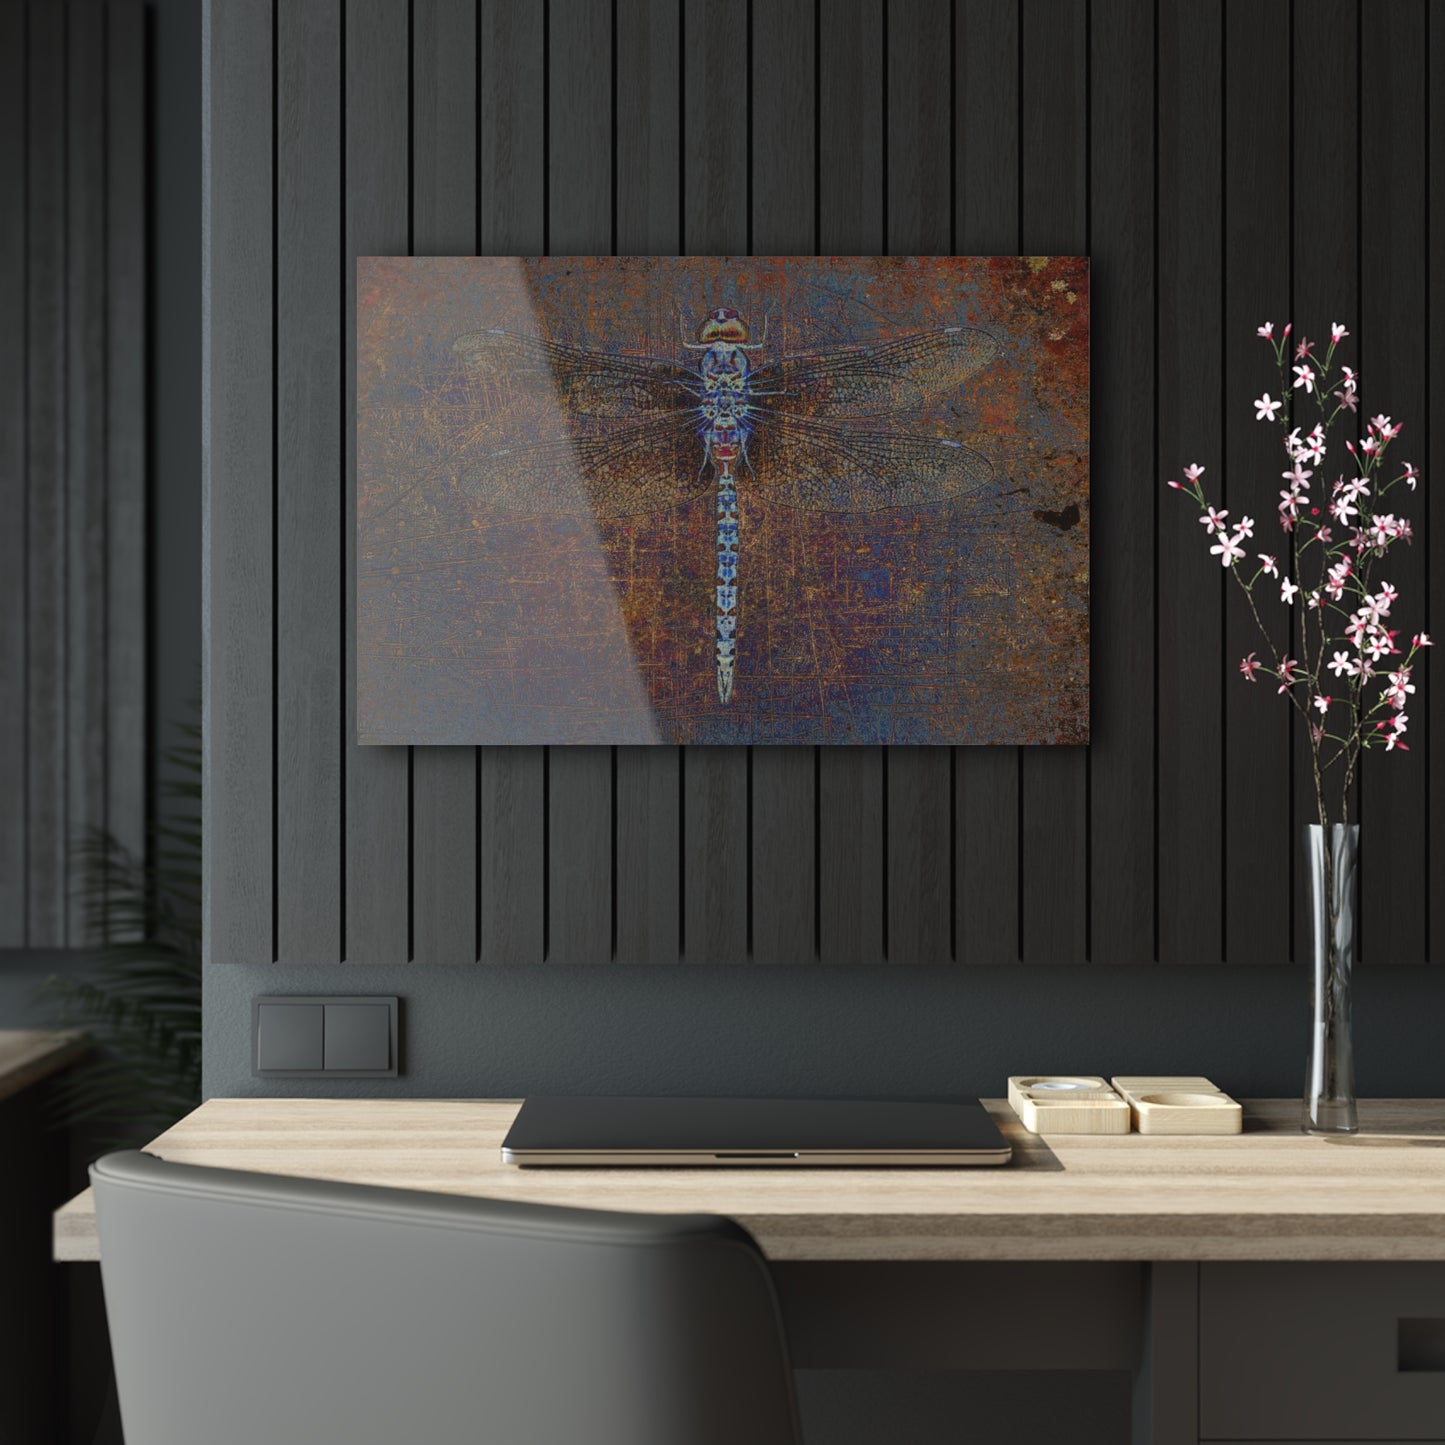 Dragonfly Themed Modern Wall Art - Dragonfly on Distressed Purple and Orange Background Print on a Crystal Clear Acrylic Panel